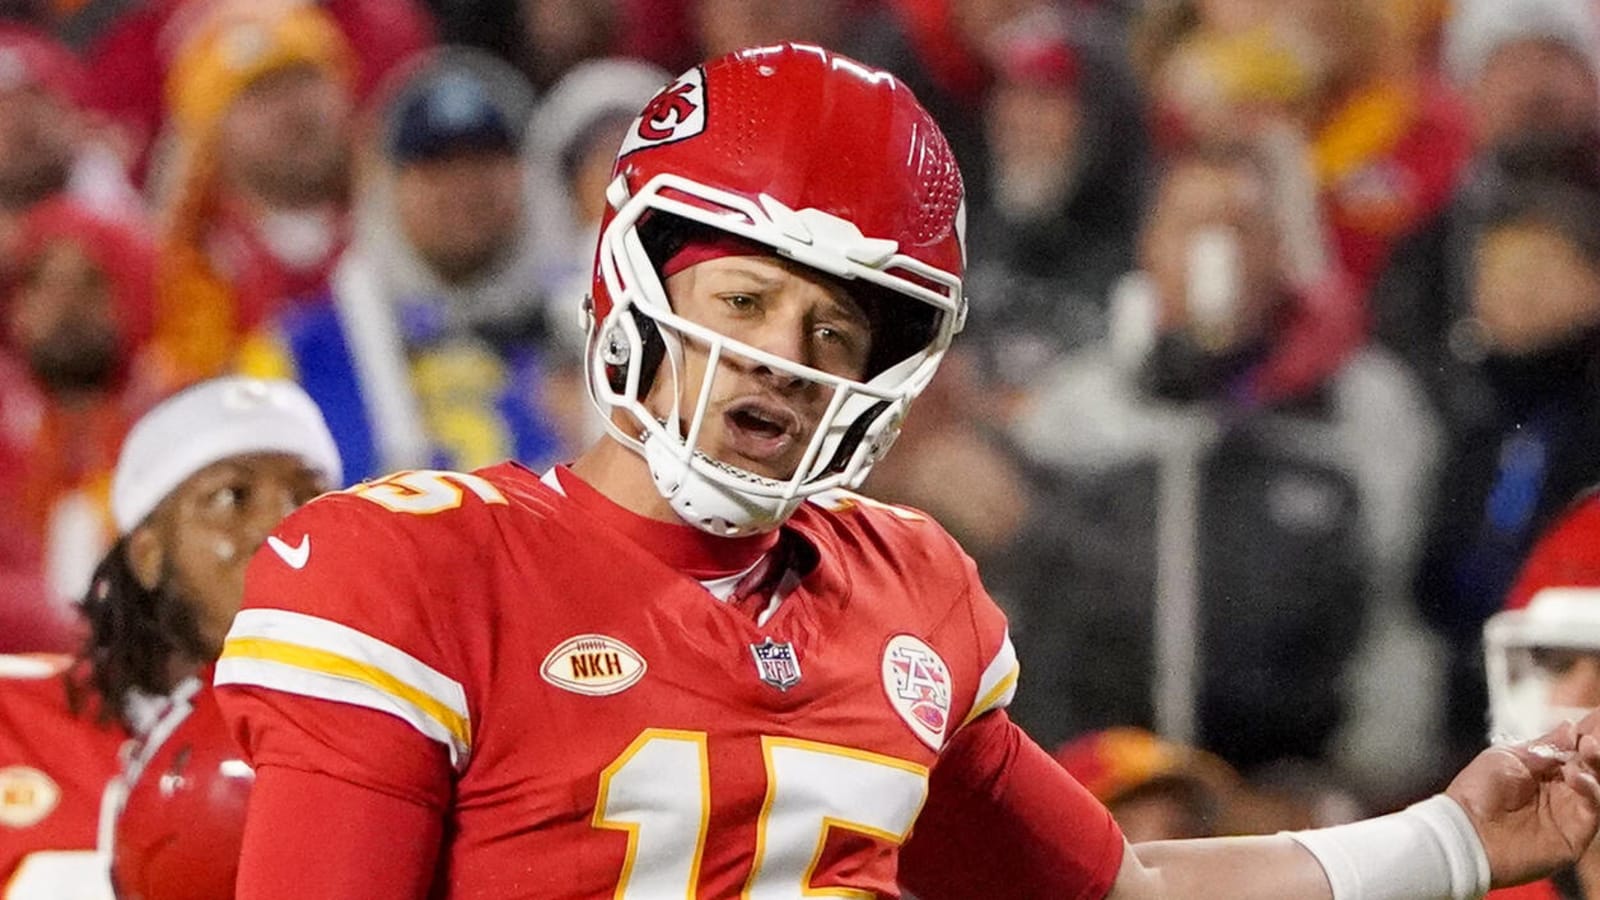 Chiefs should blame themselves for loss, not officials